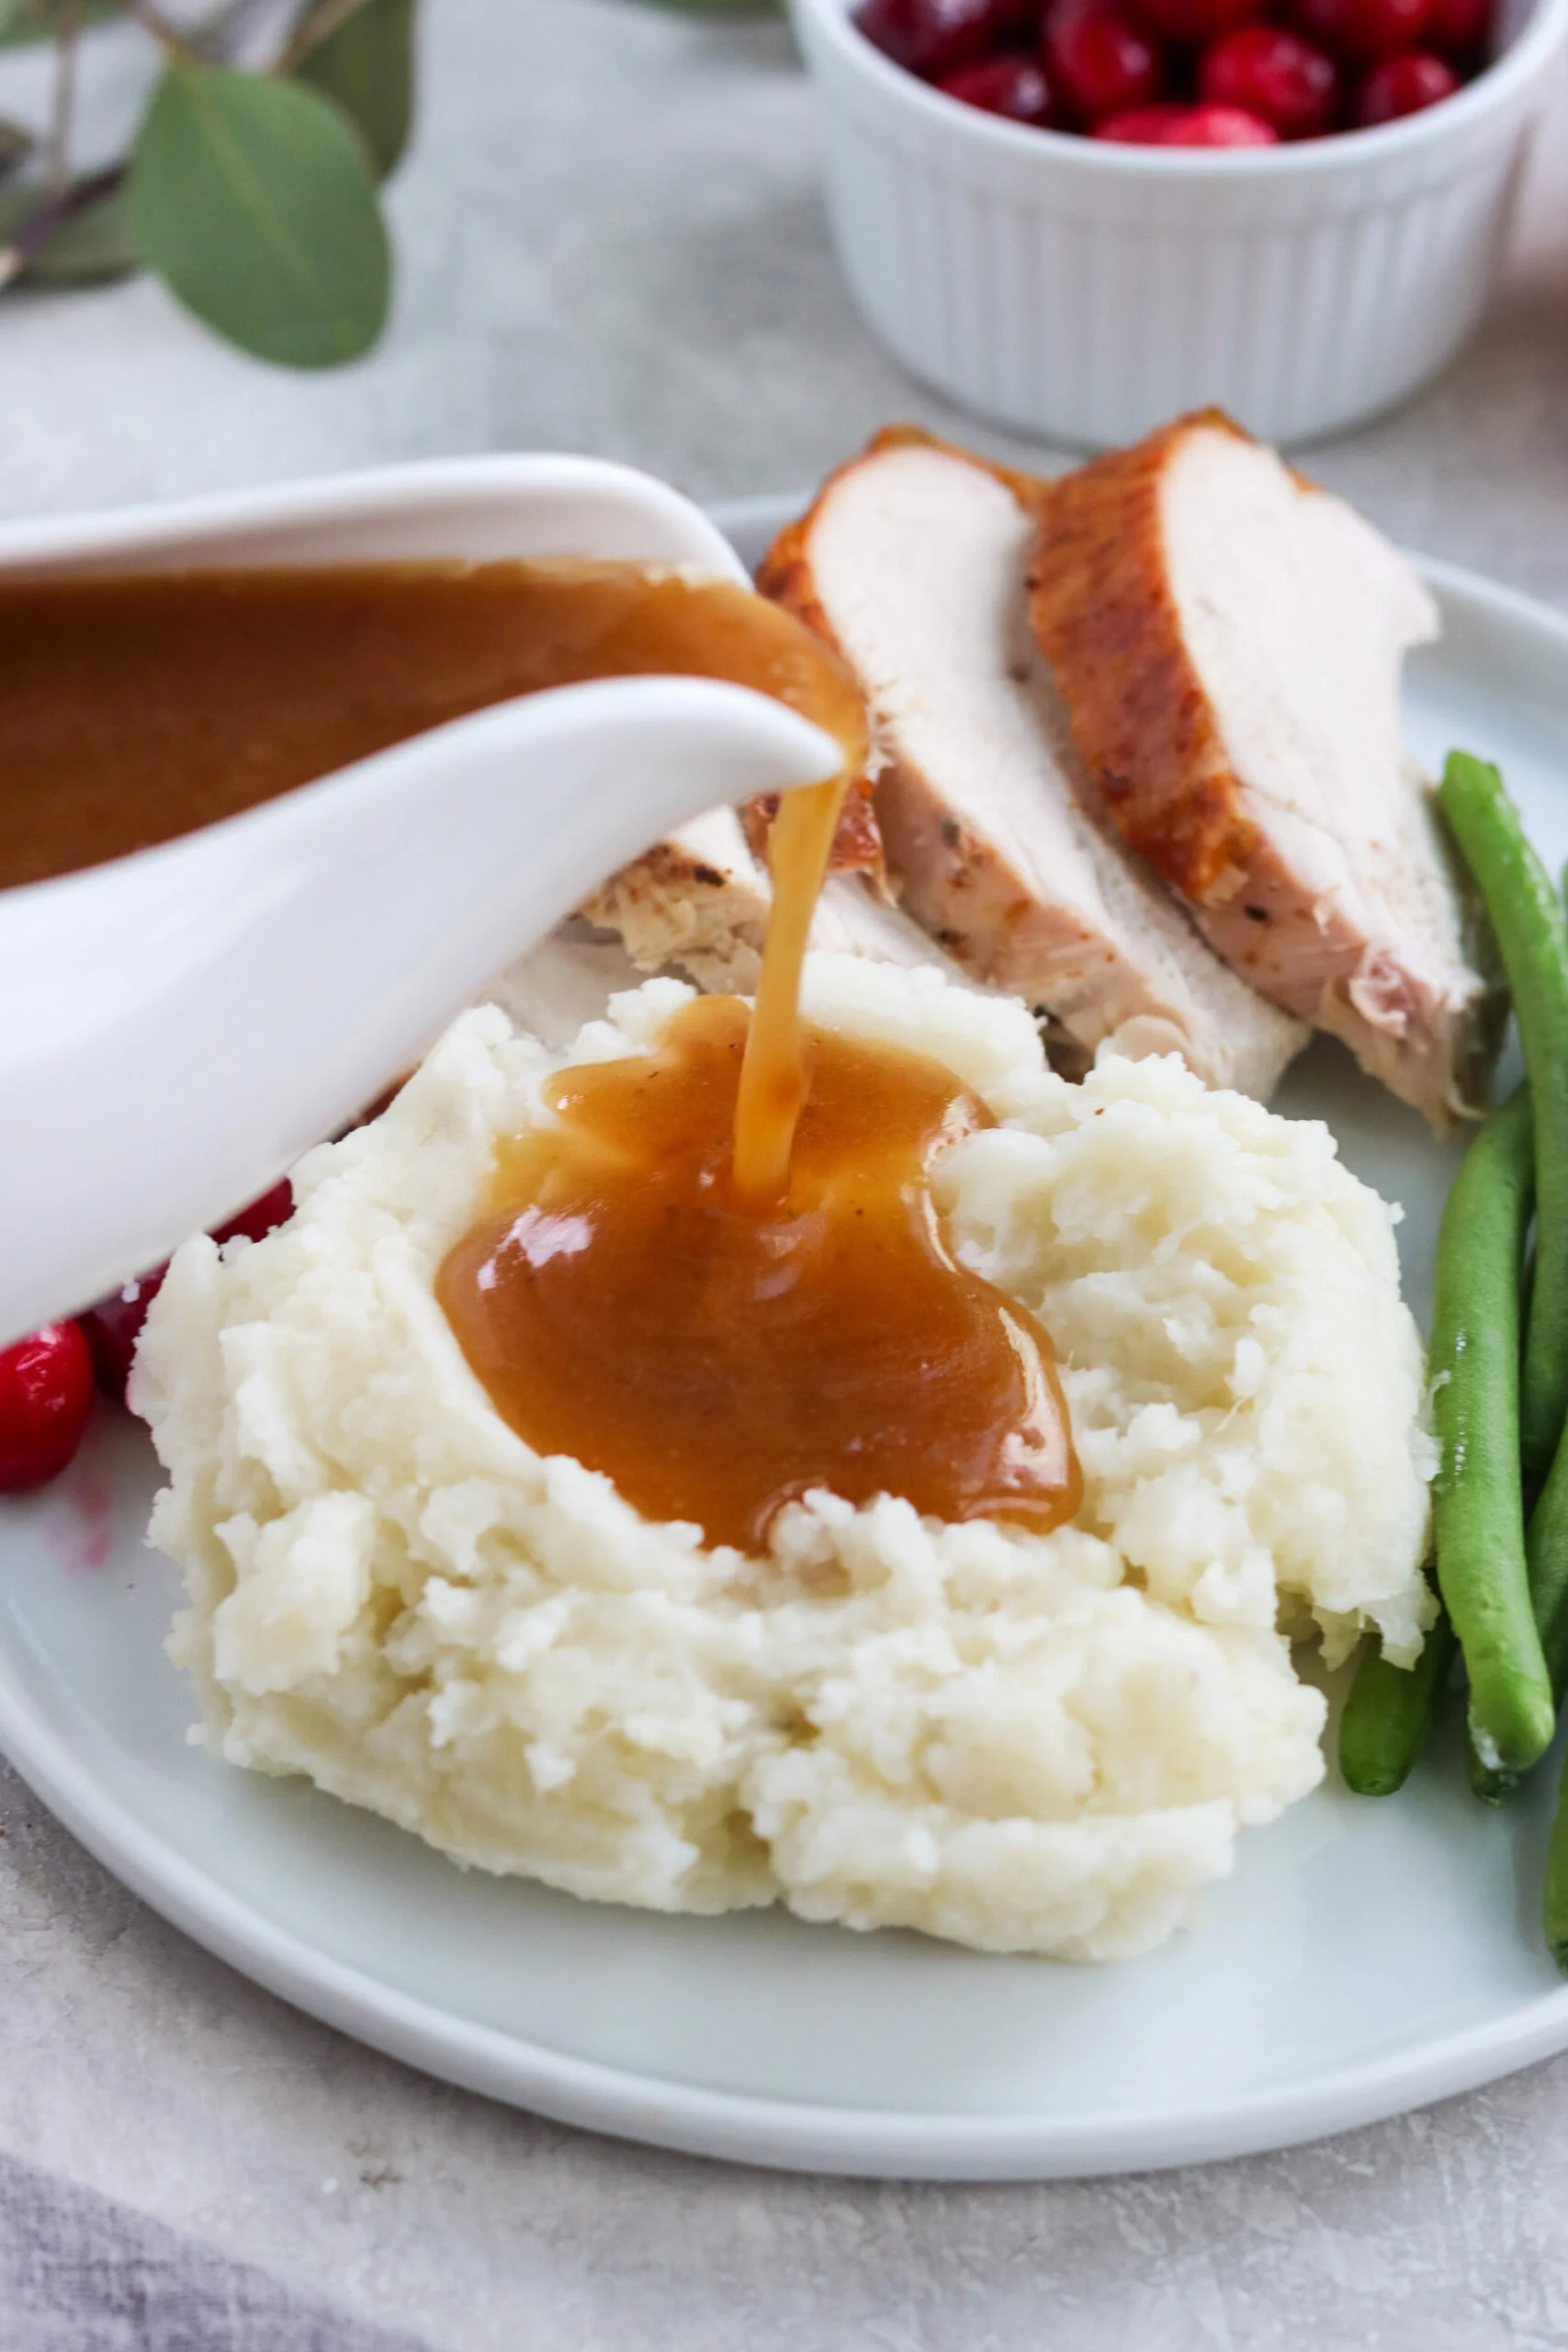 gluten free gravy being poured on a plate of mashed potatoes